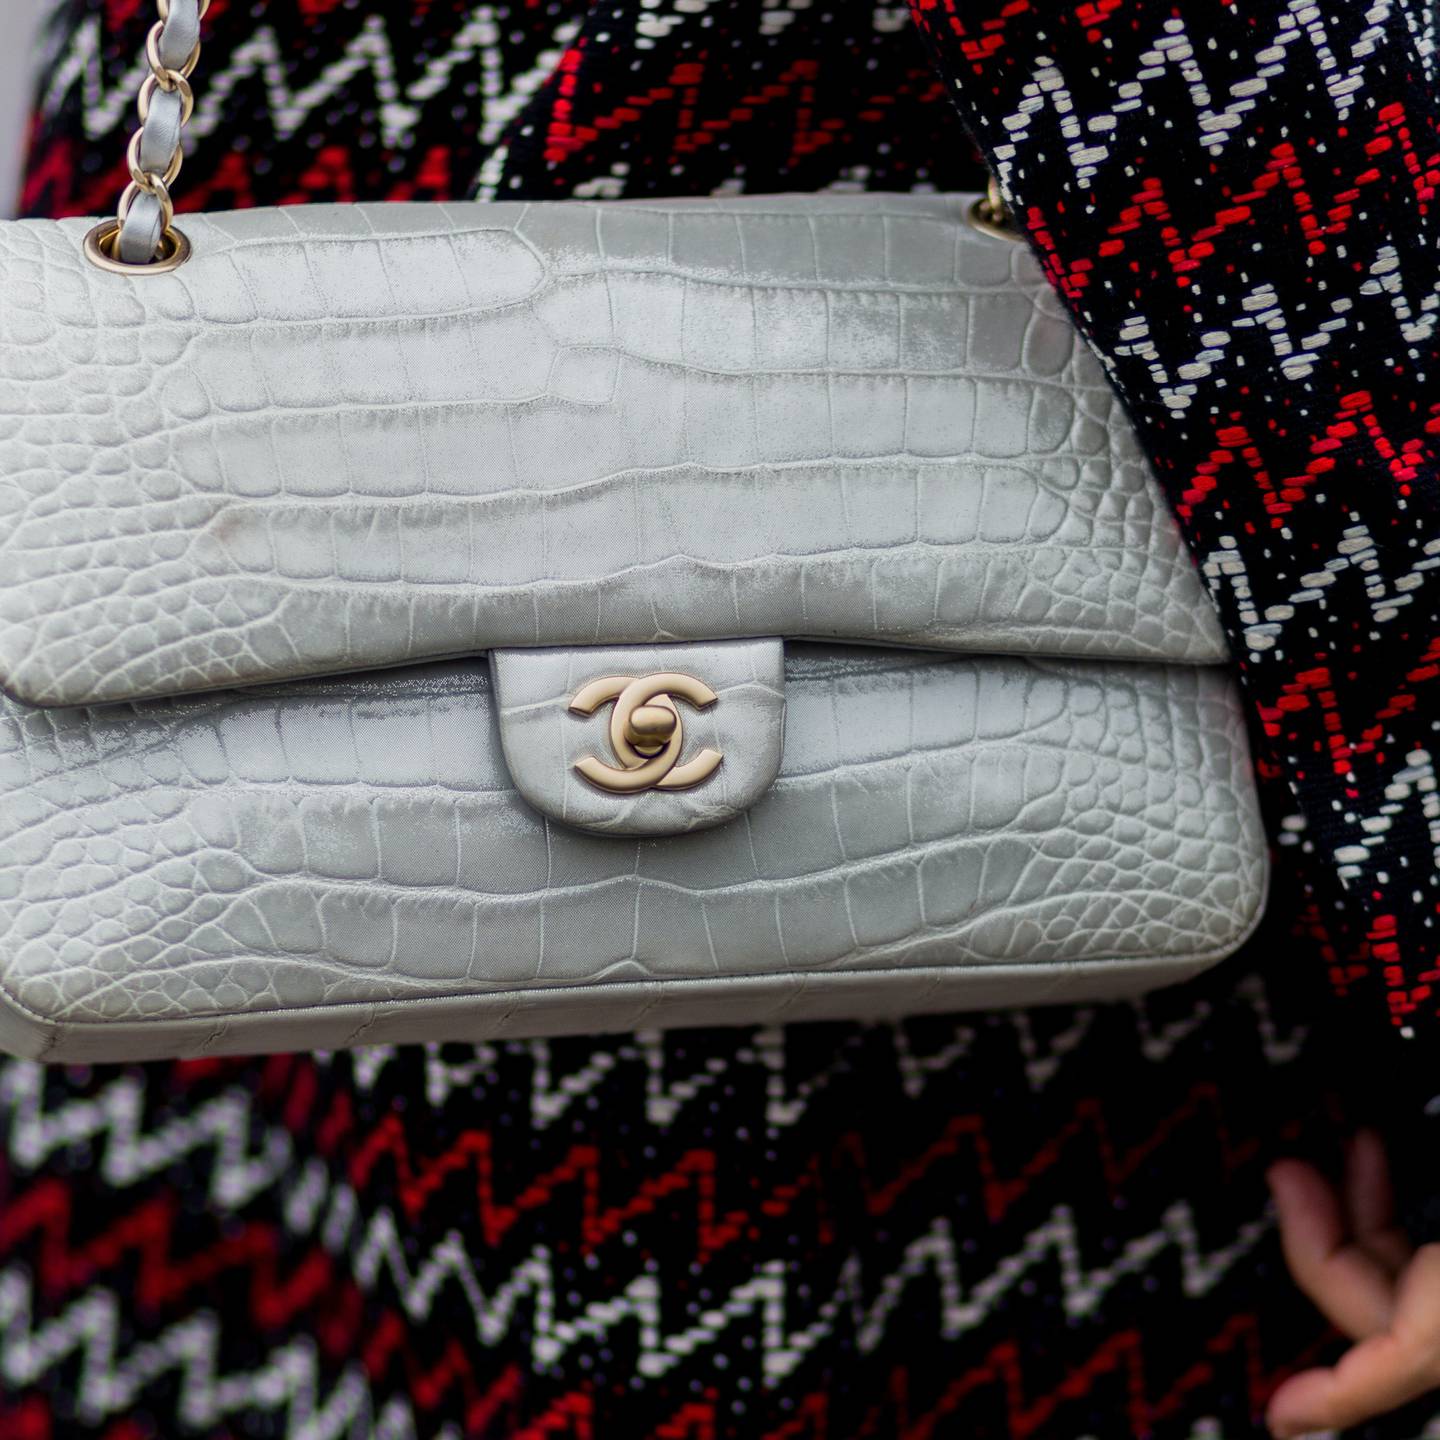 Chanel Is Aiming for Hermès Status With Handbag Price Hikes